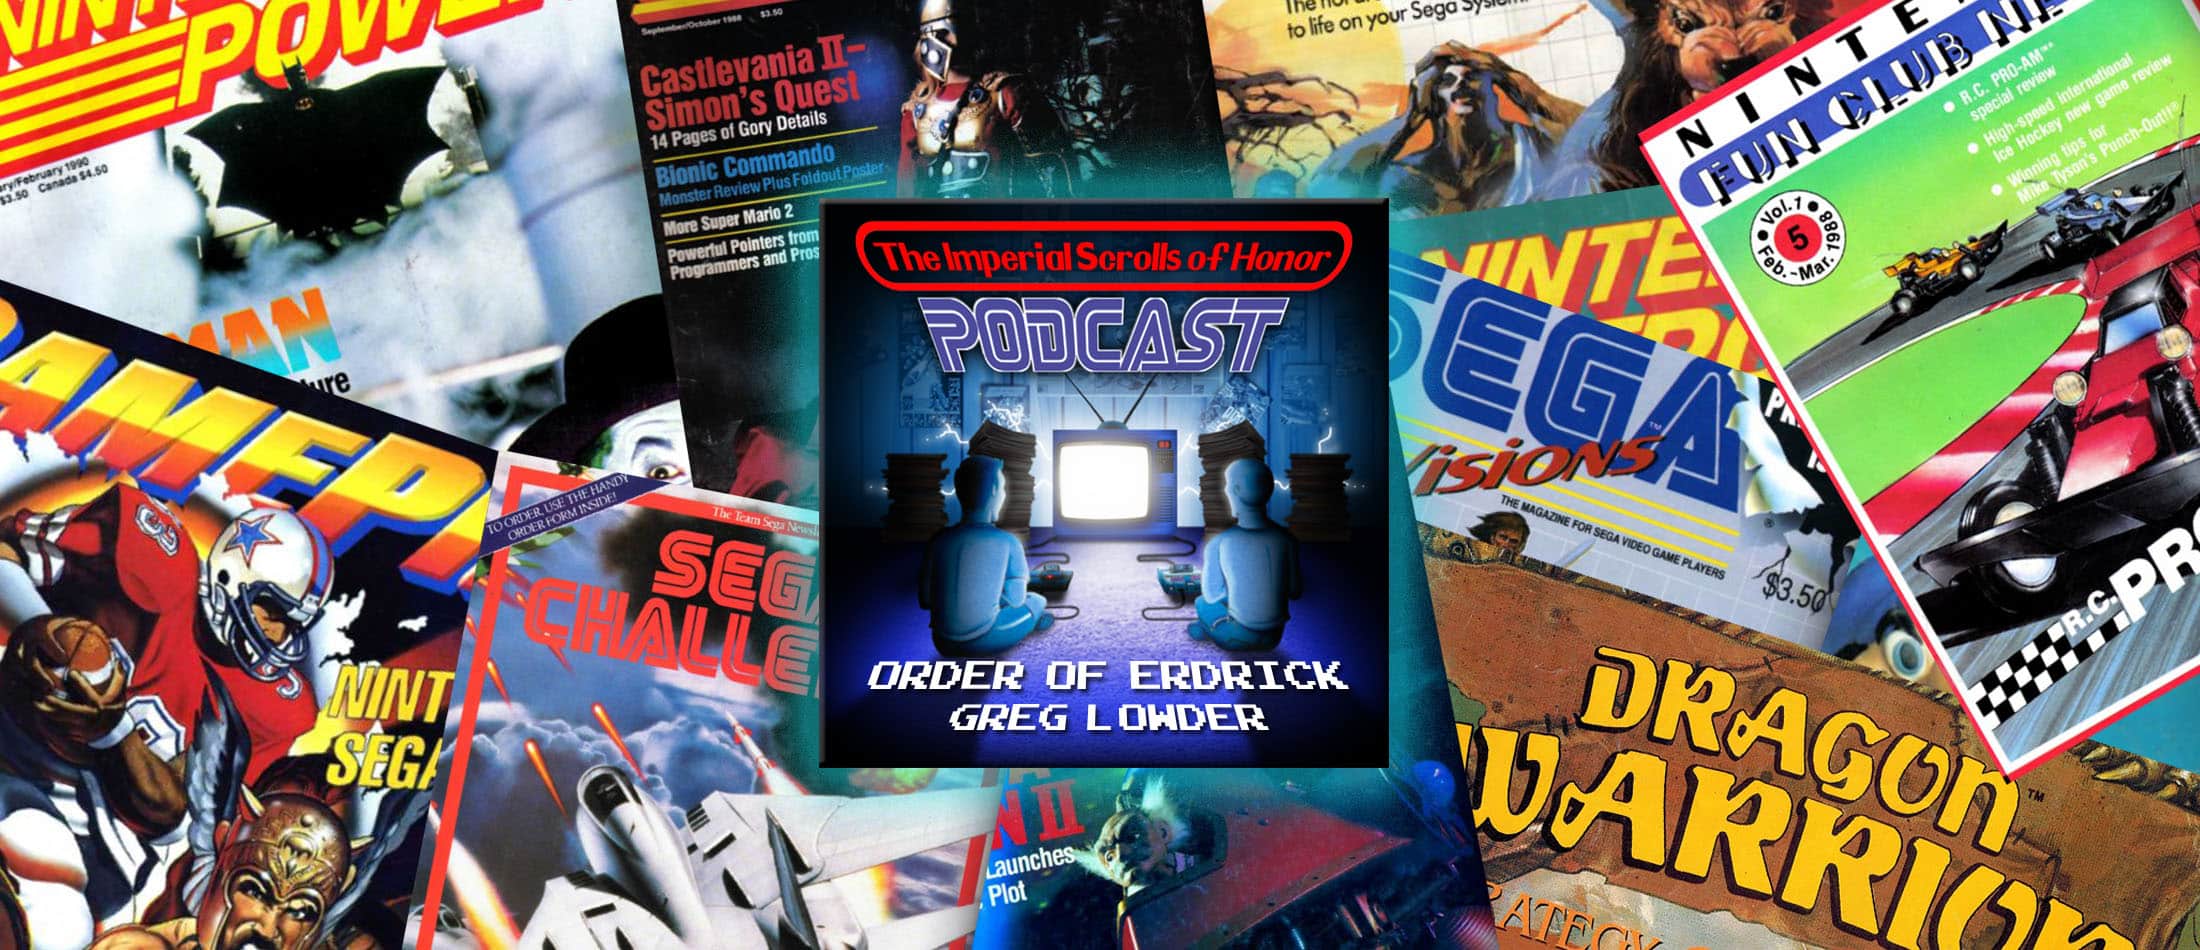 The Imperial Scrolls of Honor Podcast - ORDER OF ERDRICK: Greg Lowder Interview